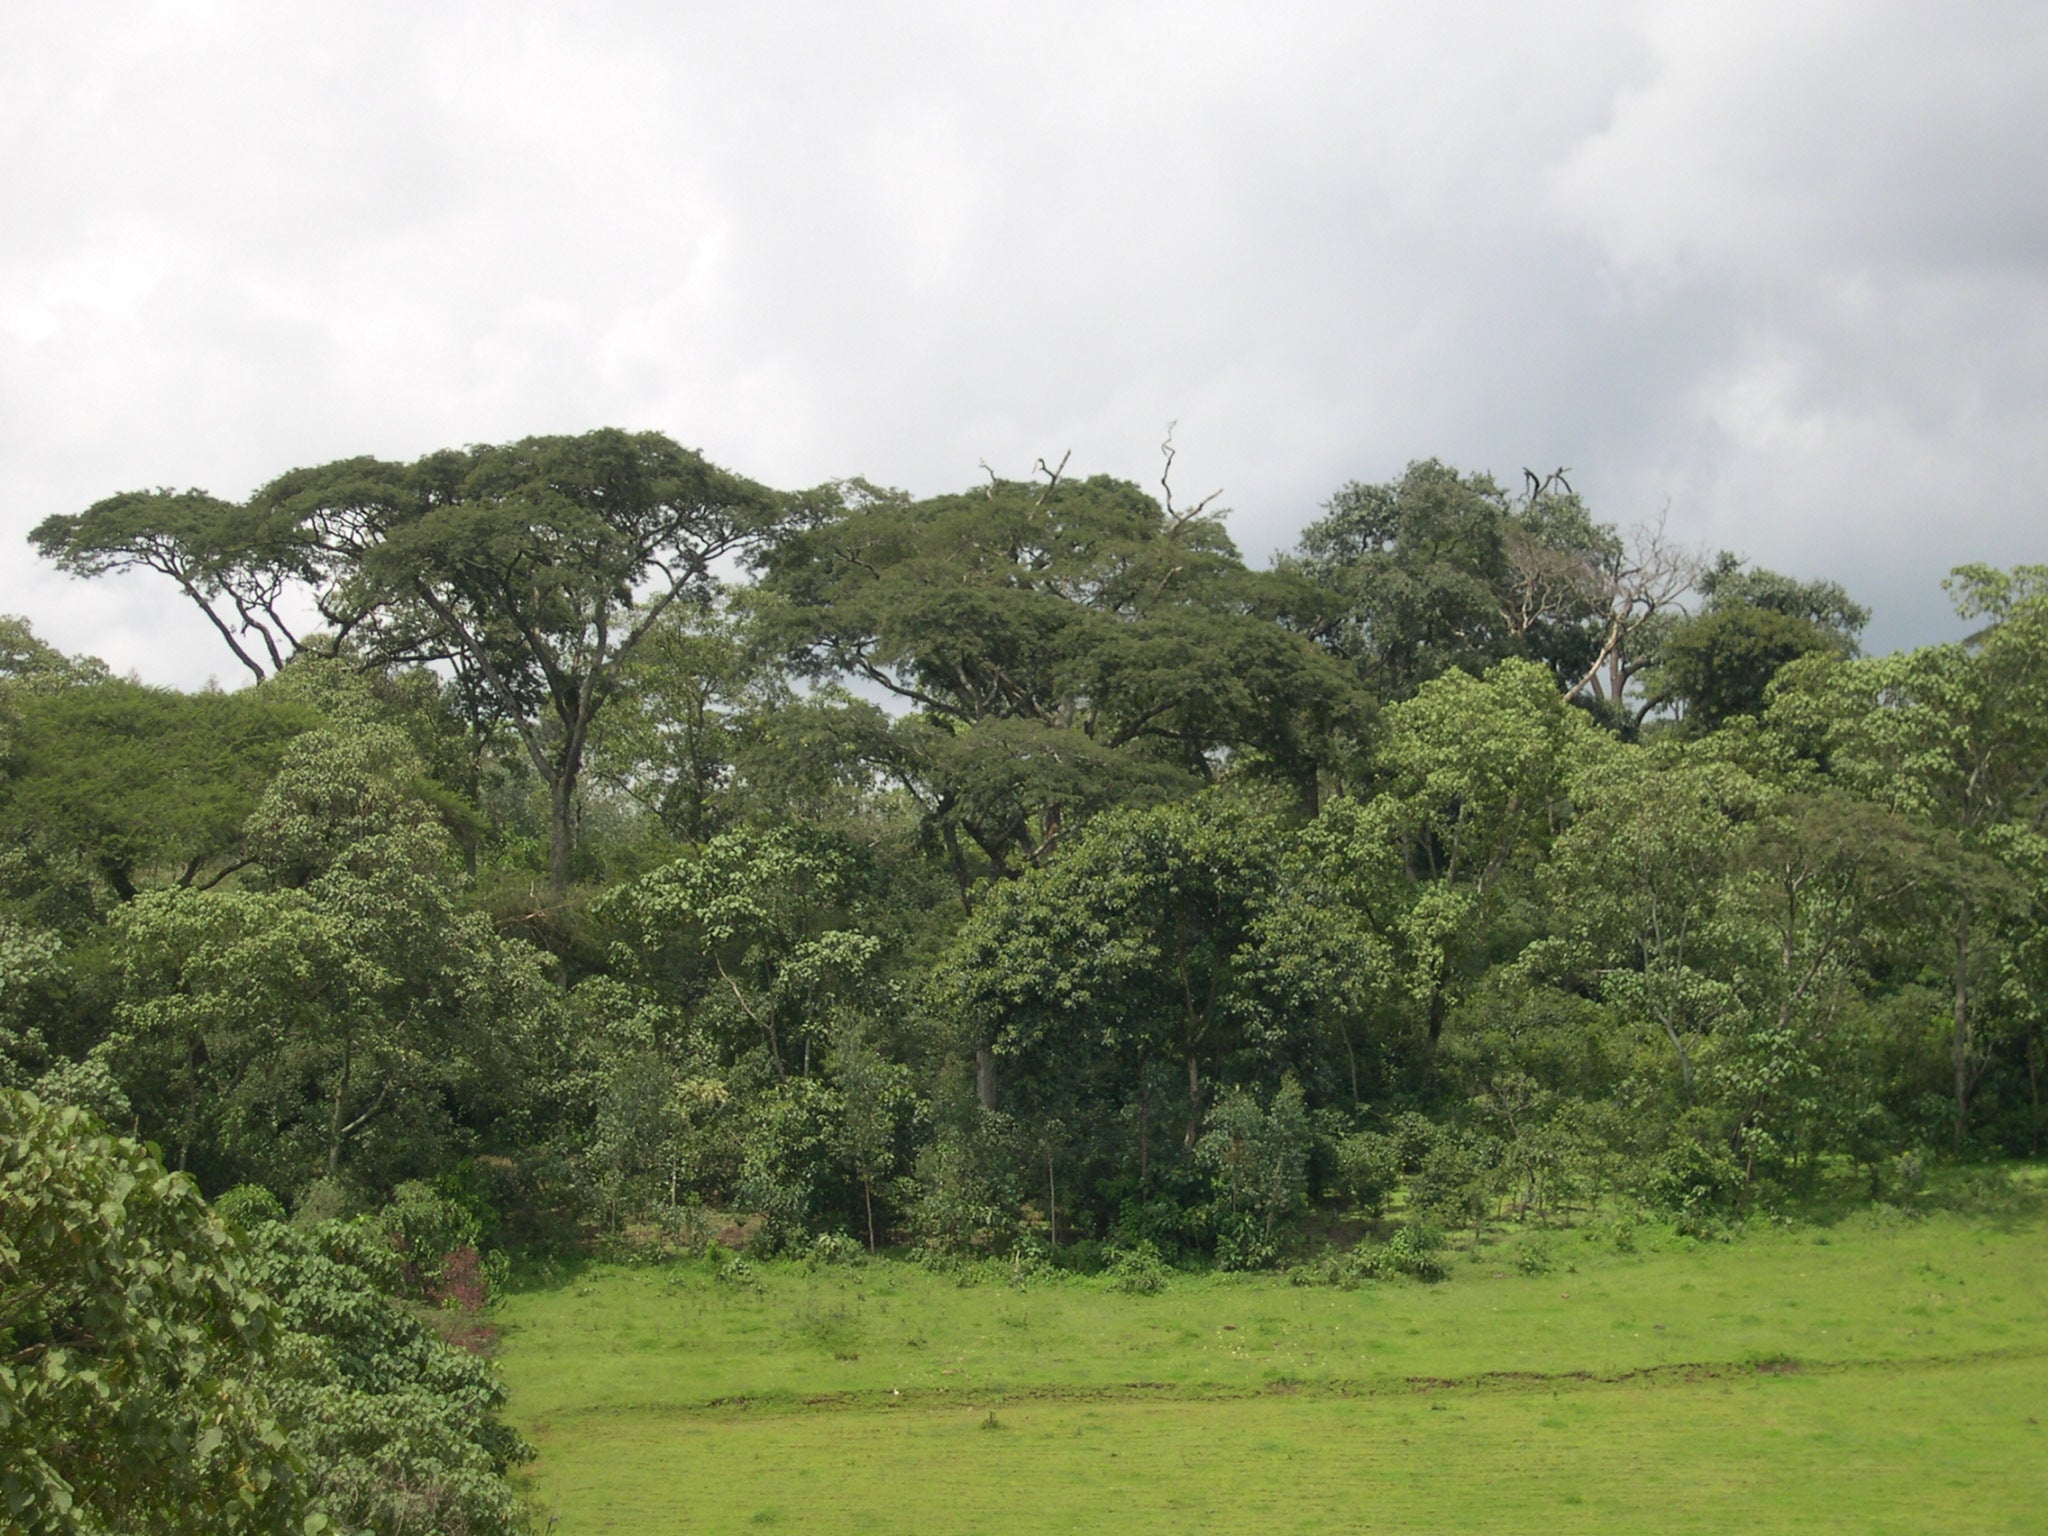 A shade coffee farm in Ethiopia with a section of grass surrounded by trees and shrubs of different heights